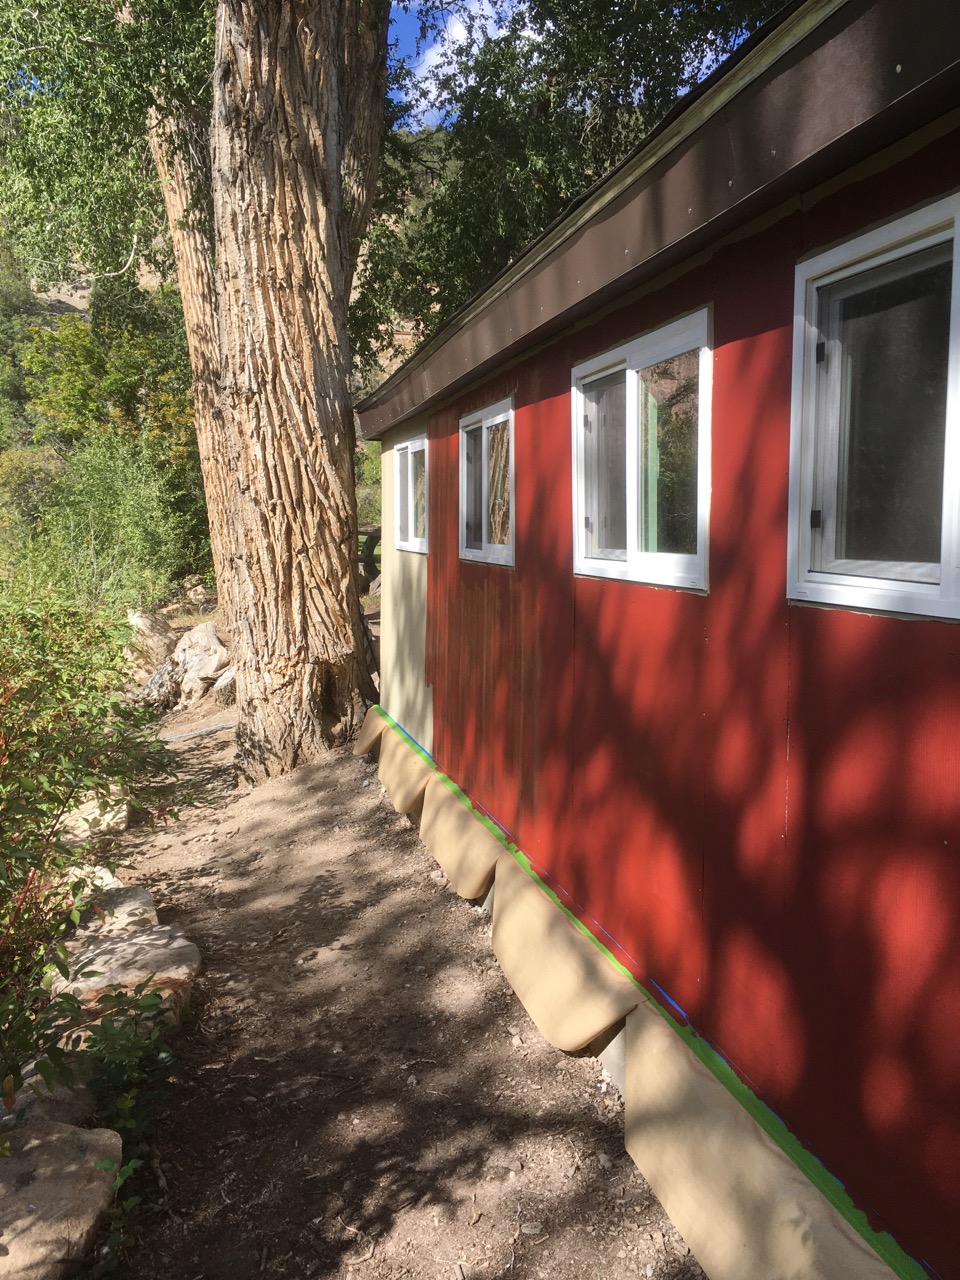 Siding and paint on back wall